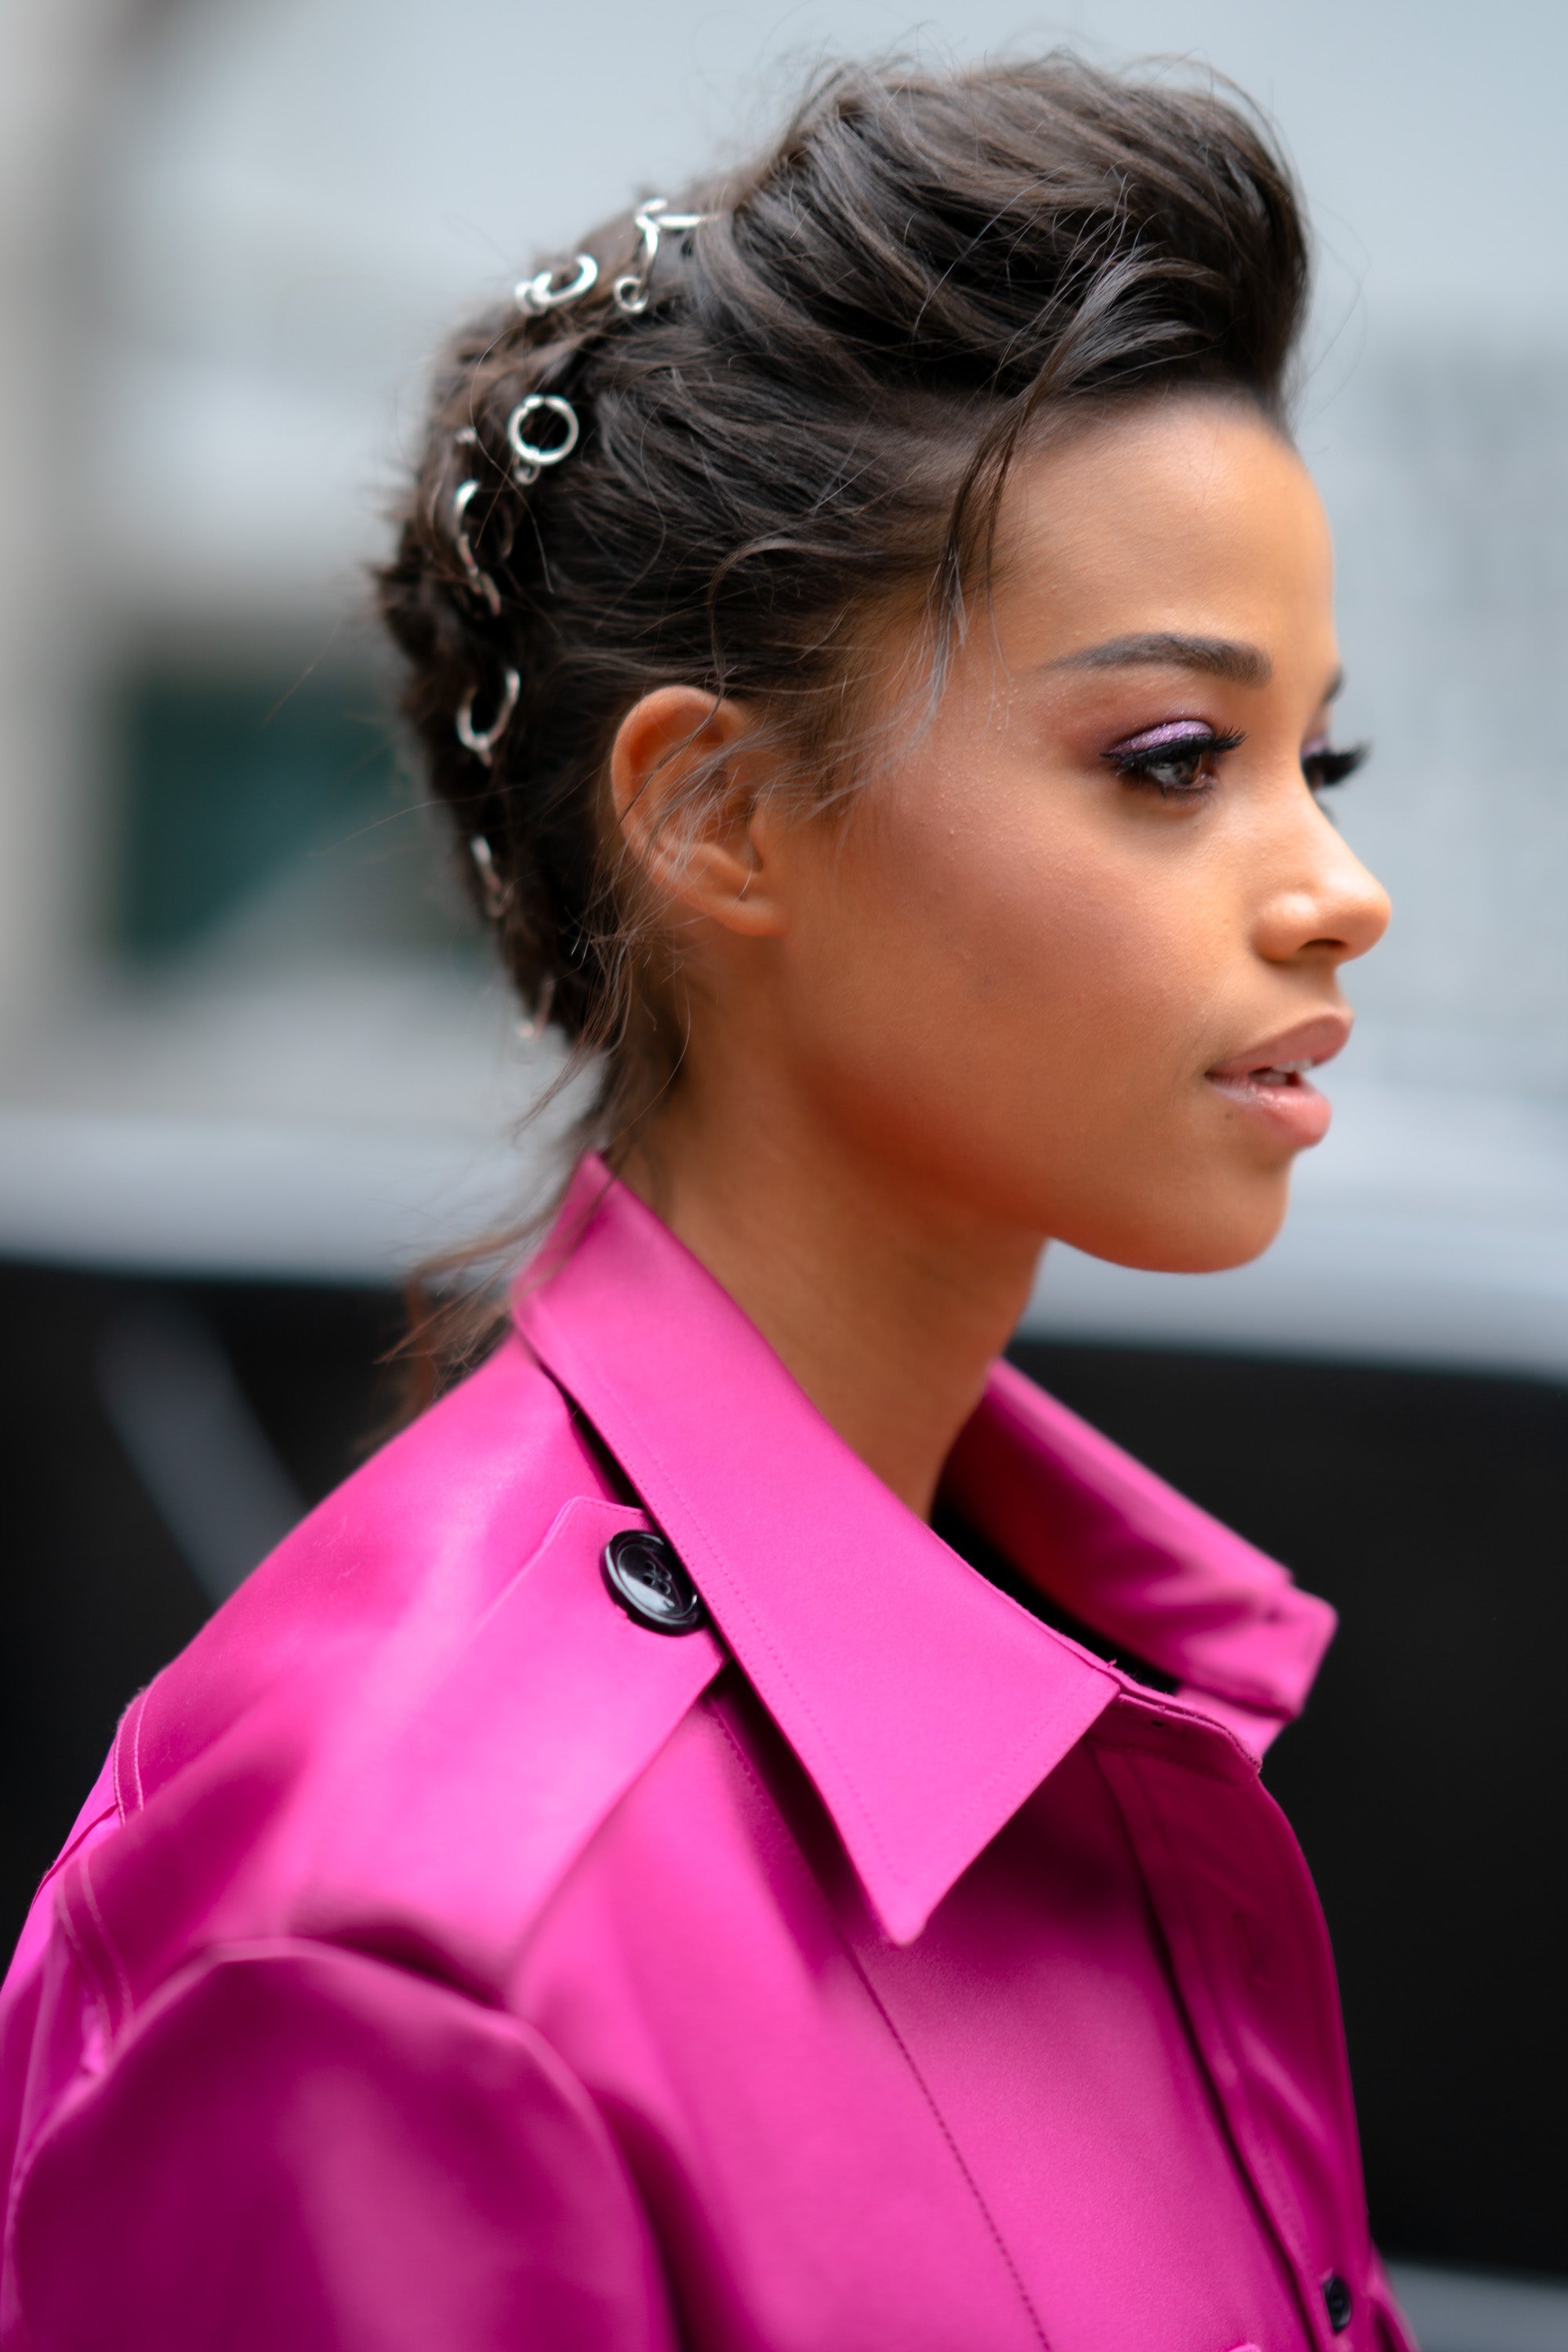 Hair Rings Are The Only Jewelry You Need This Season